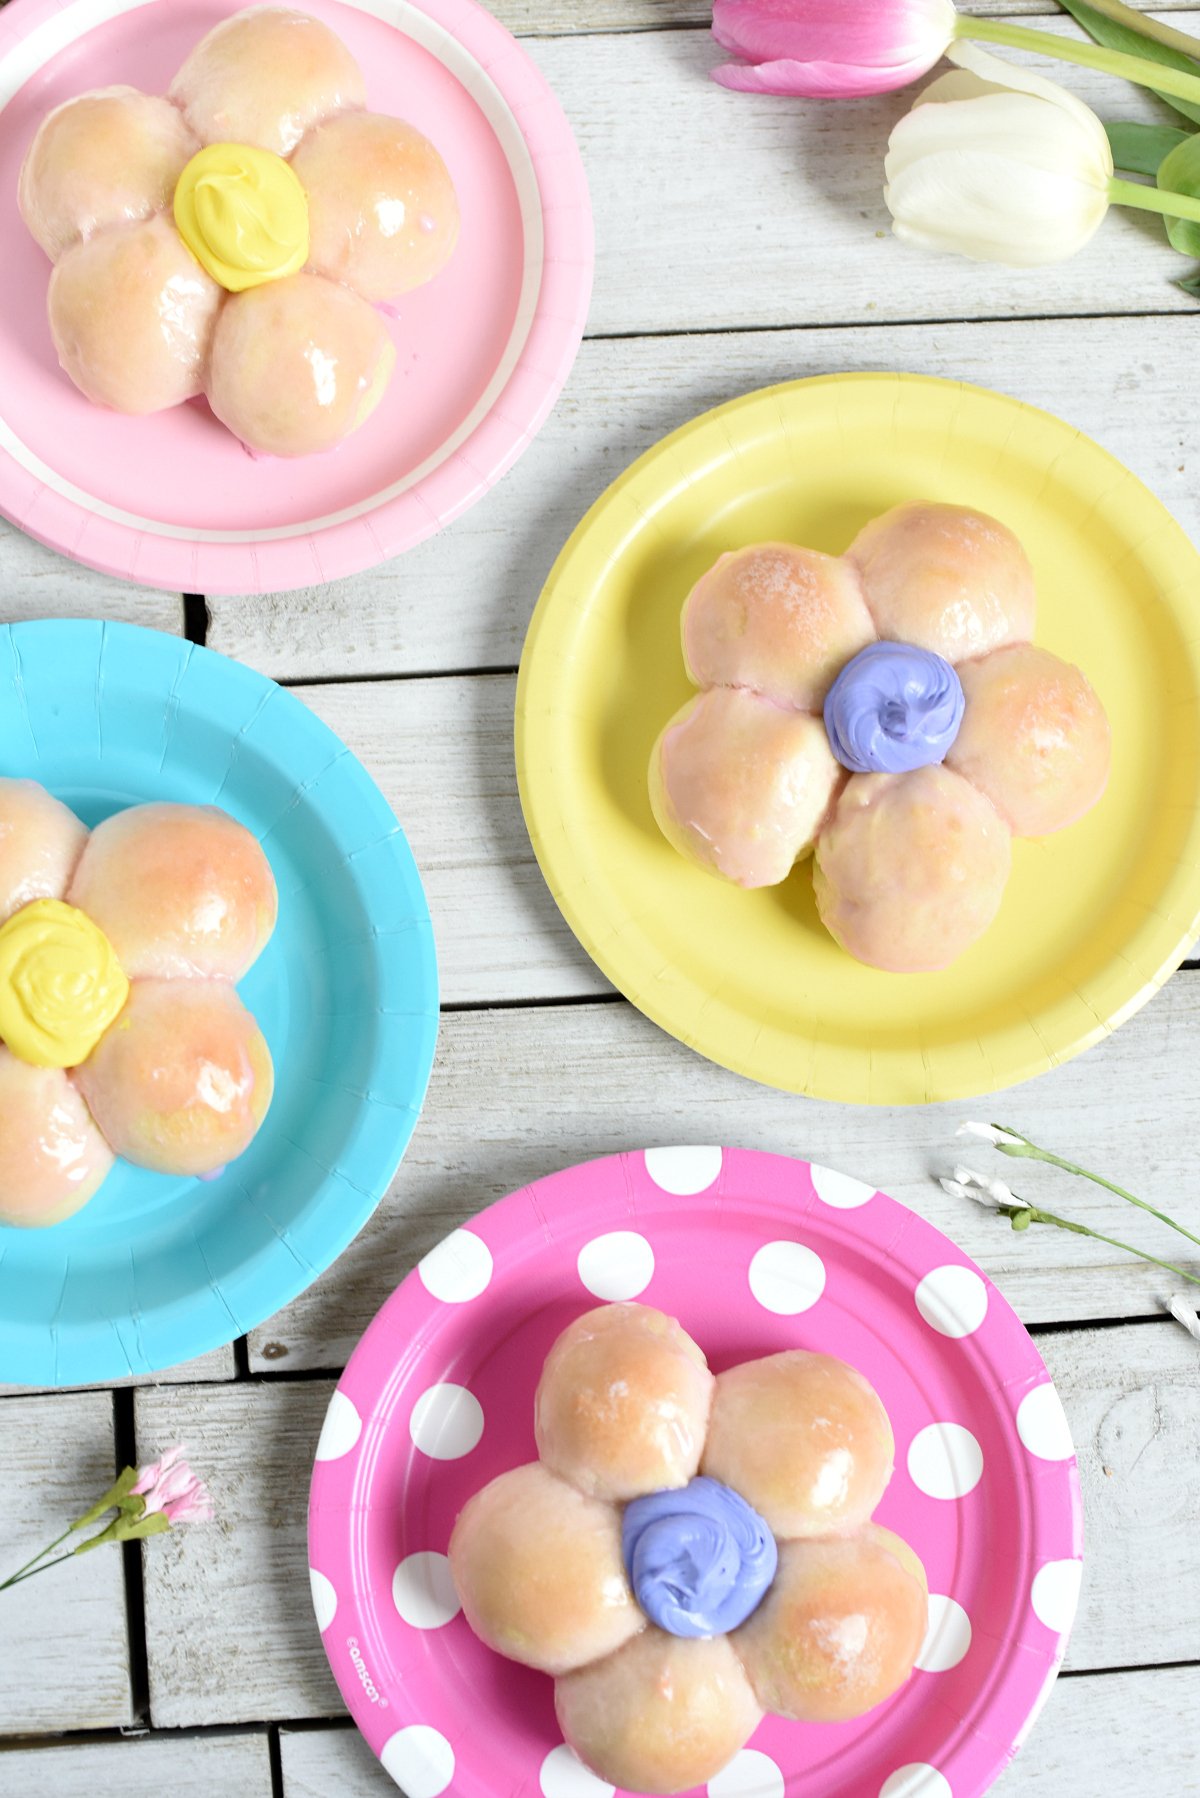 Mother's Day Brunch Recipes-Make these cute Spring flowers for a great Mother's Day brunch that she will love. #mothersday #mothersdaybrunch #breakfast #food #recipes #yum